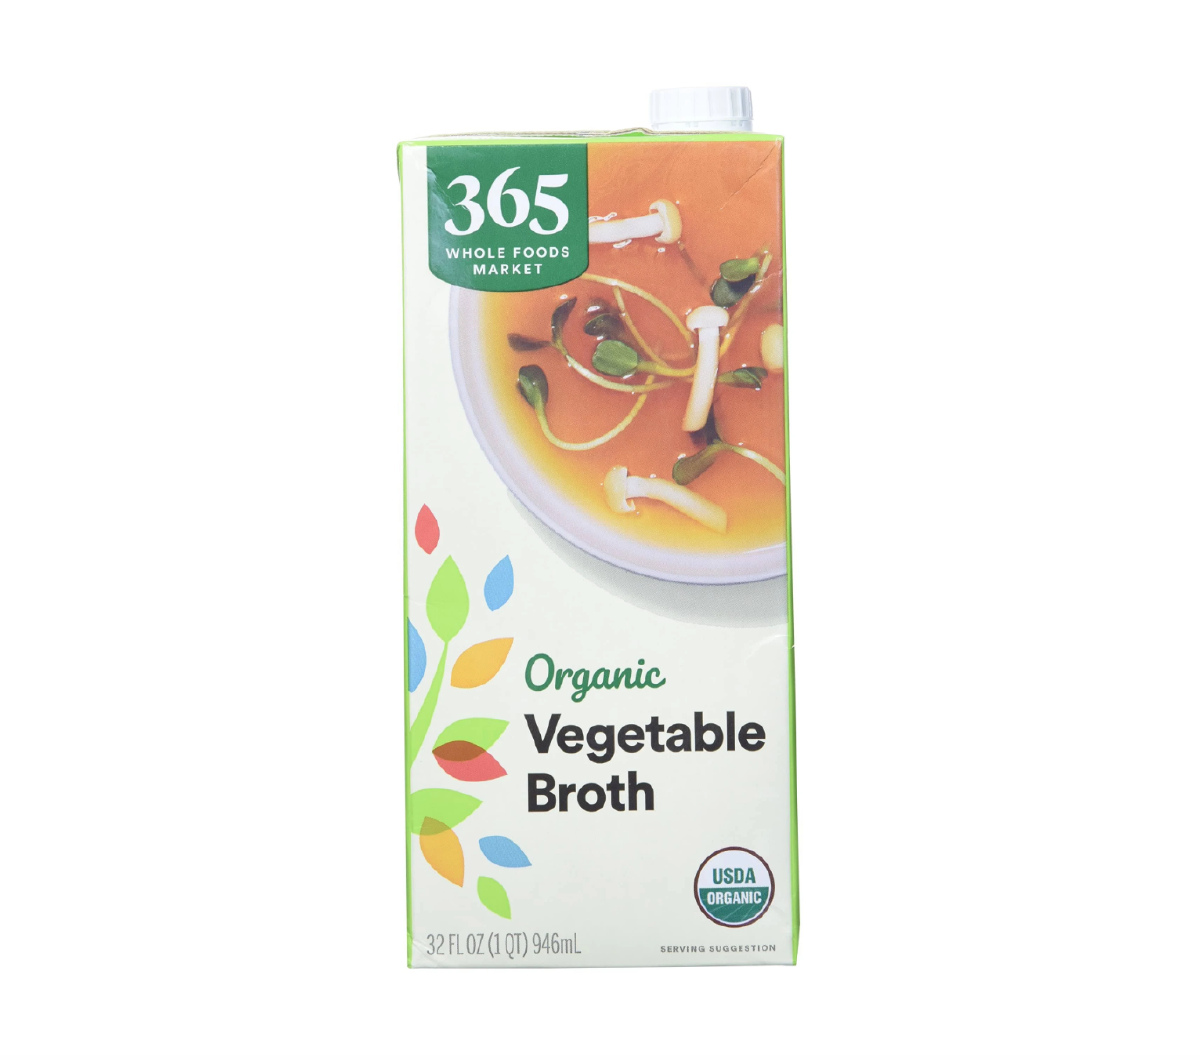 An aseptic container of Organic Vegetable Broth by 365 Whole Foods Market against a white background. 